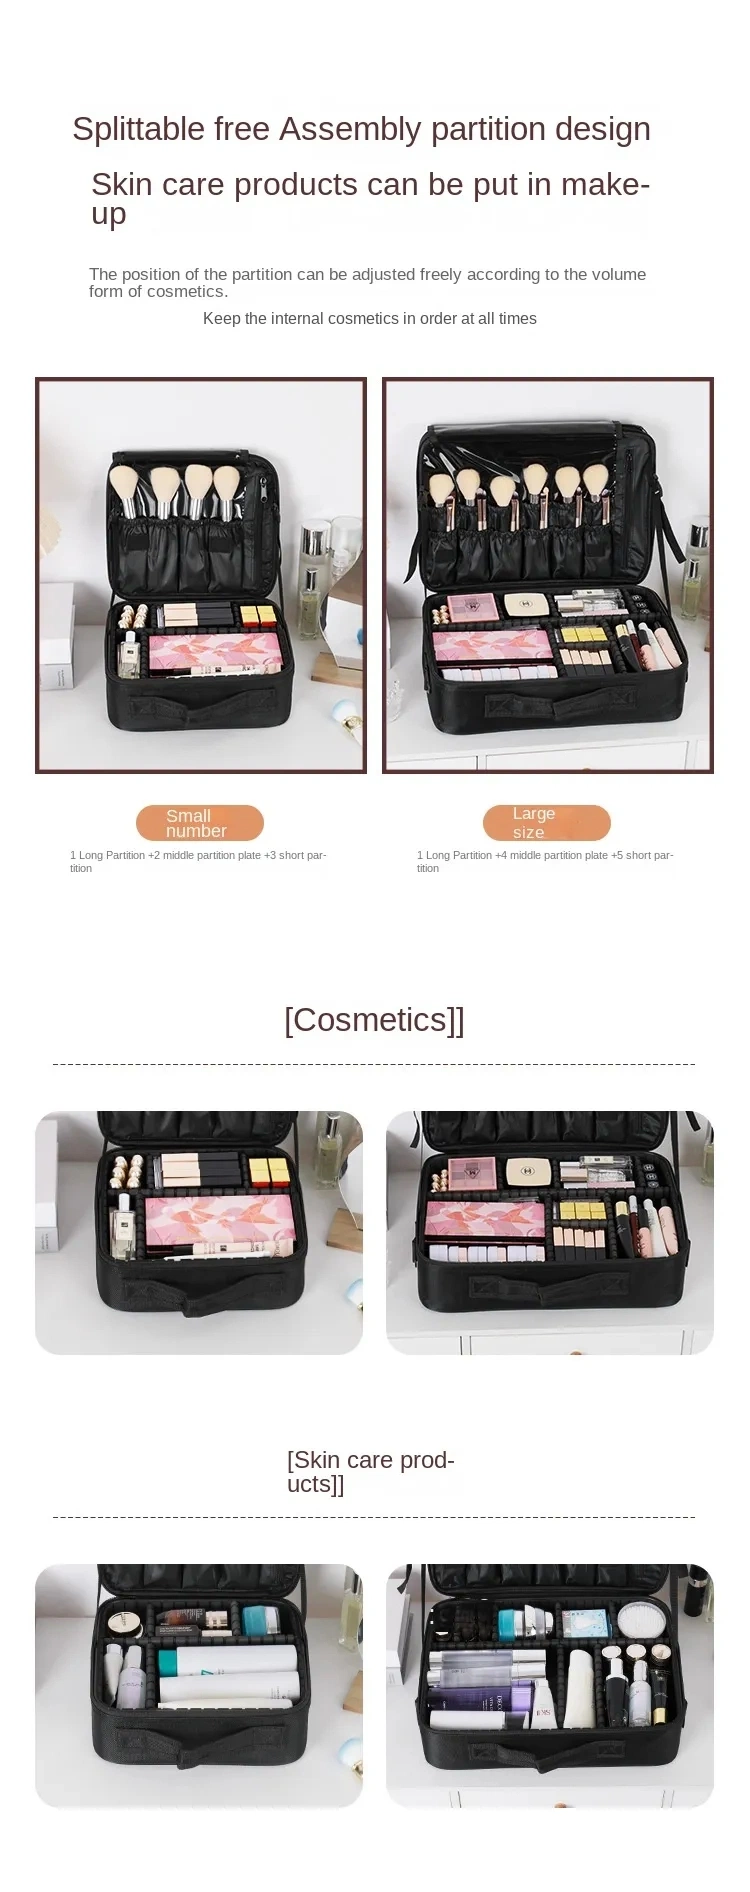 Factory Price Large Capacity Storage Case Zipper Makeup Portable Make up Box Women Travel Cosmetic Brush Inserts Bag Cosmetic Case